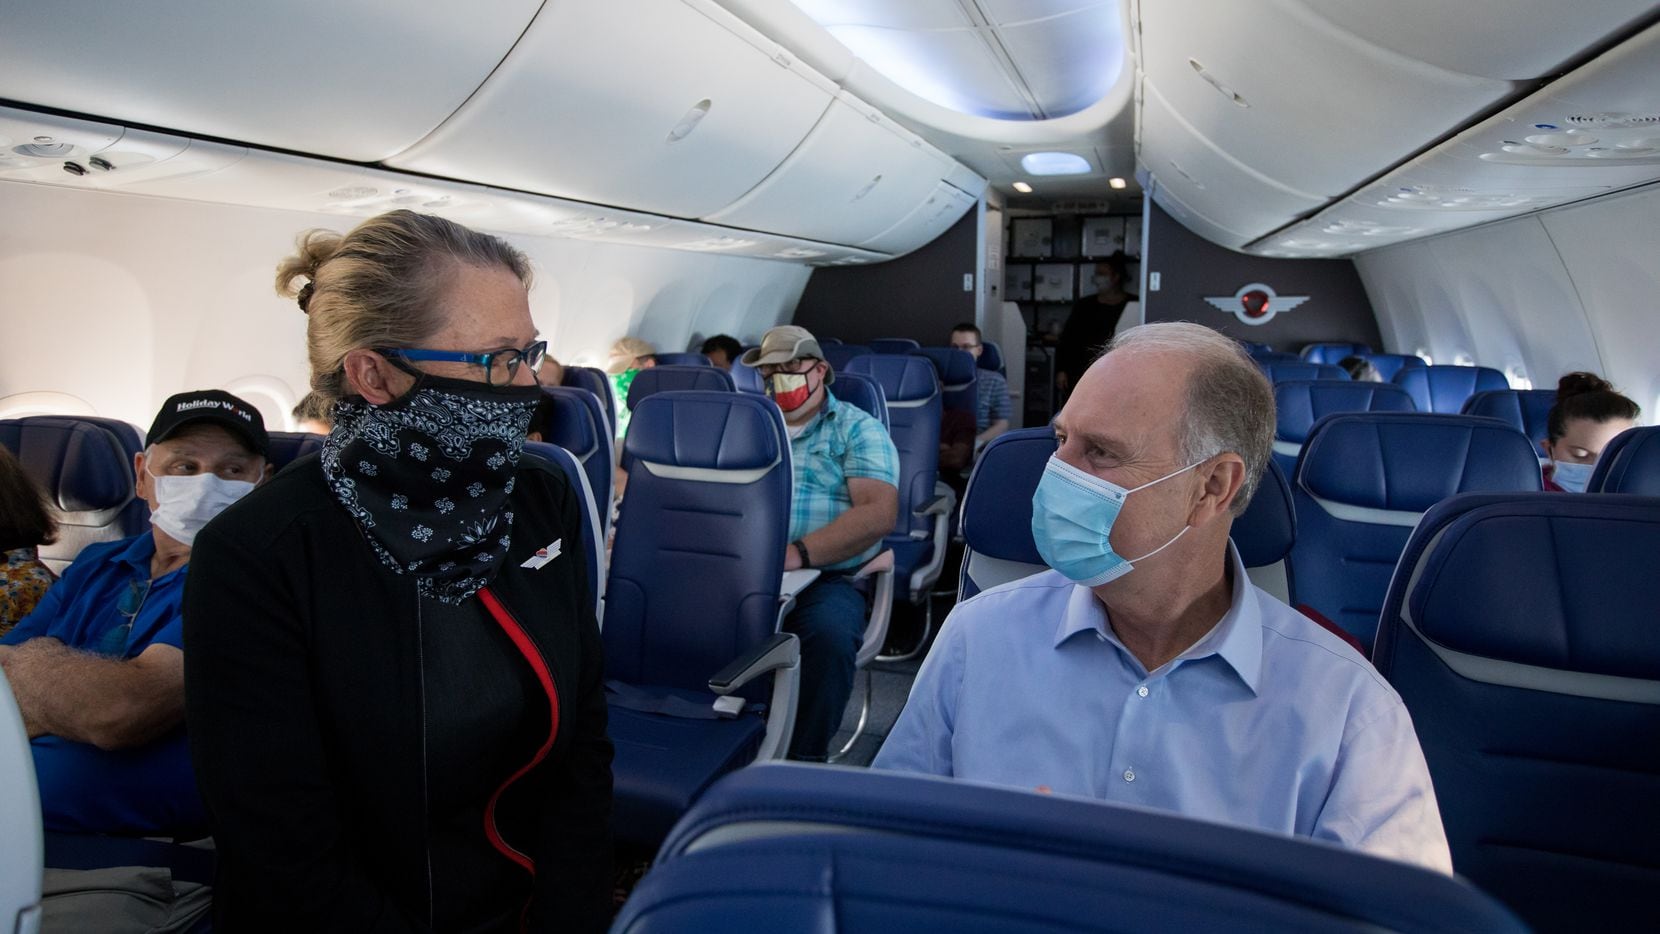 How can i become a flight attendant for southwest airlines Southwest Airlines Will Hire Flight Attendants Again As Demand Returns To Air Travel